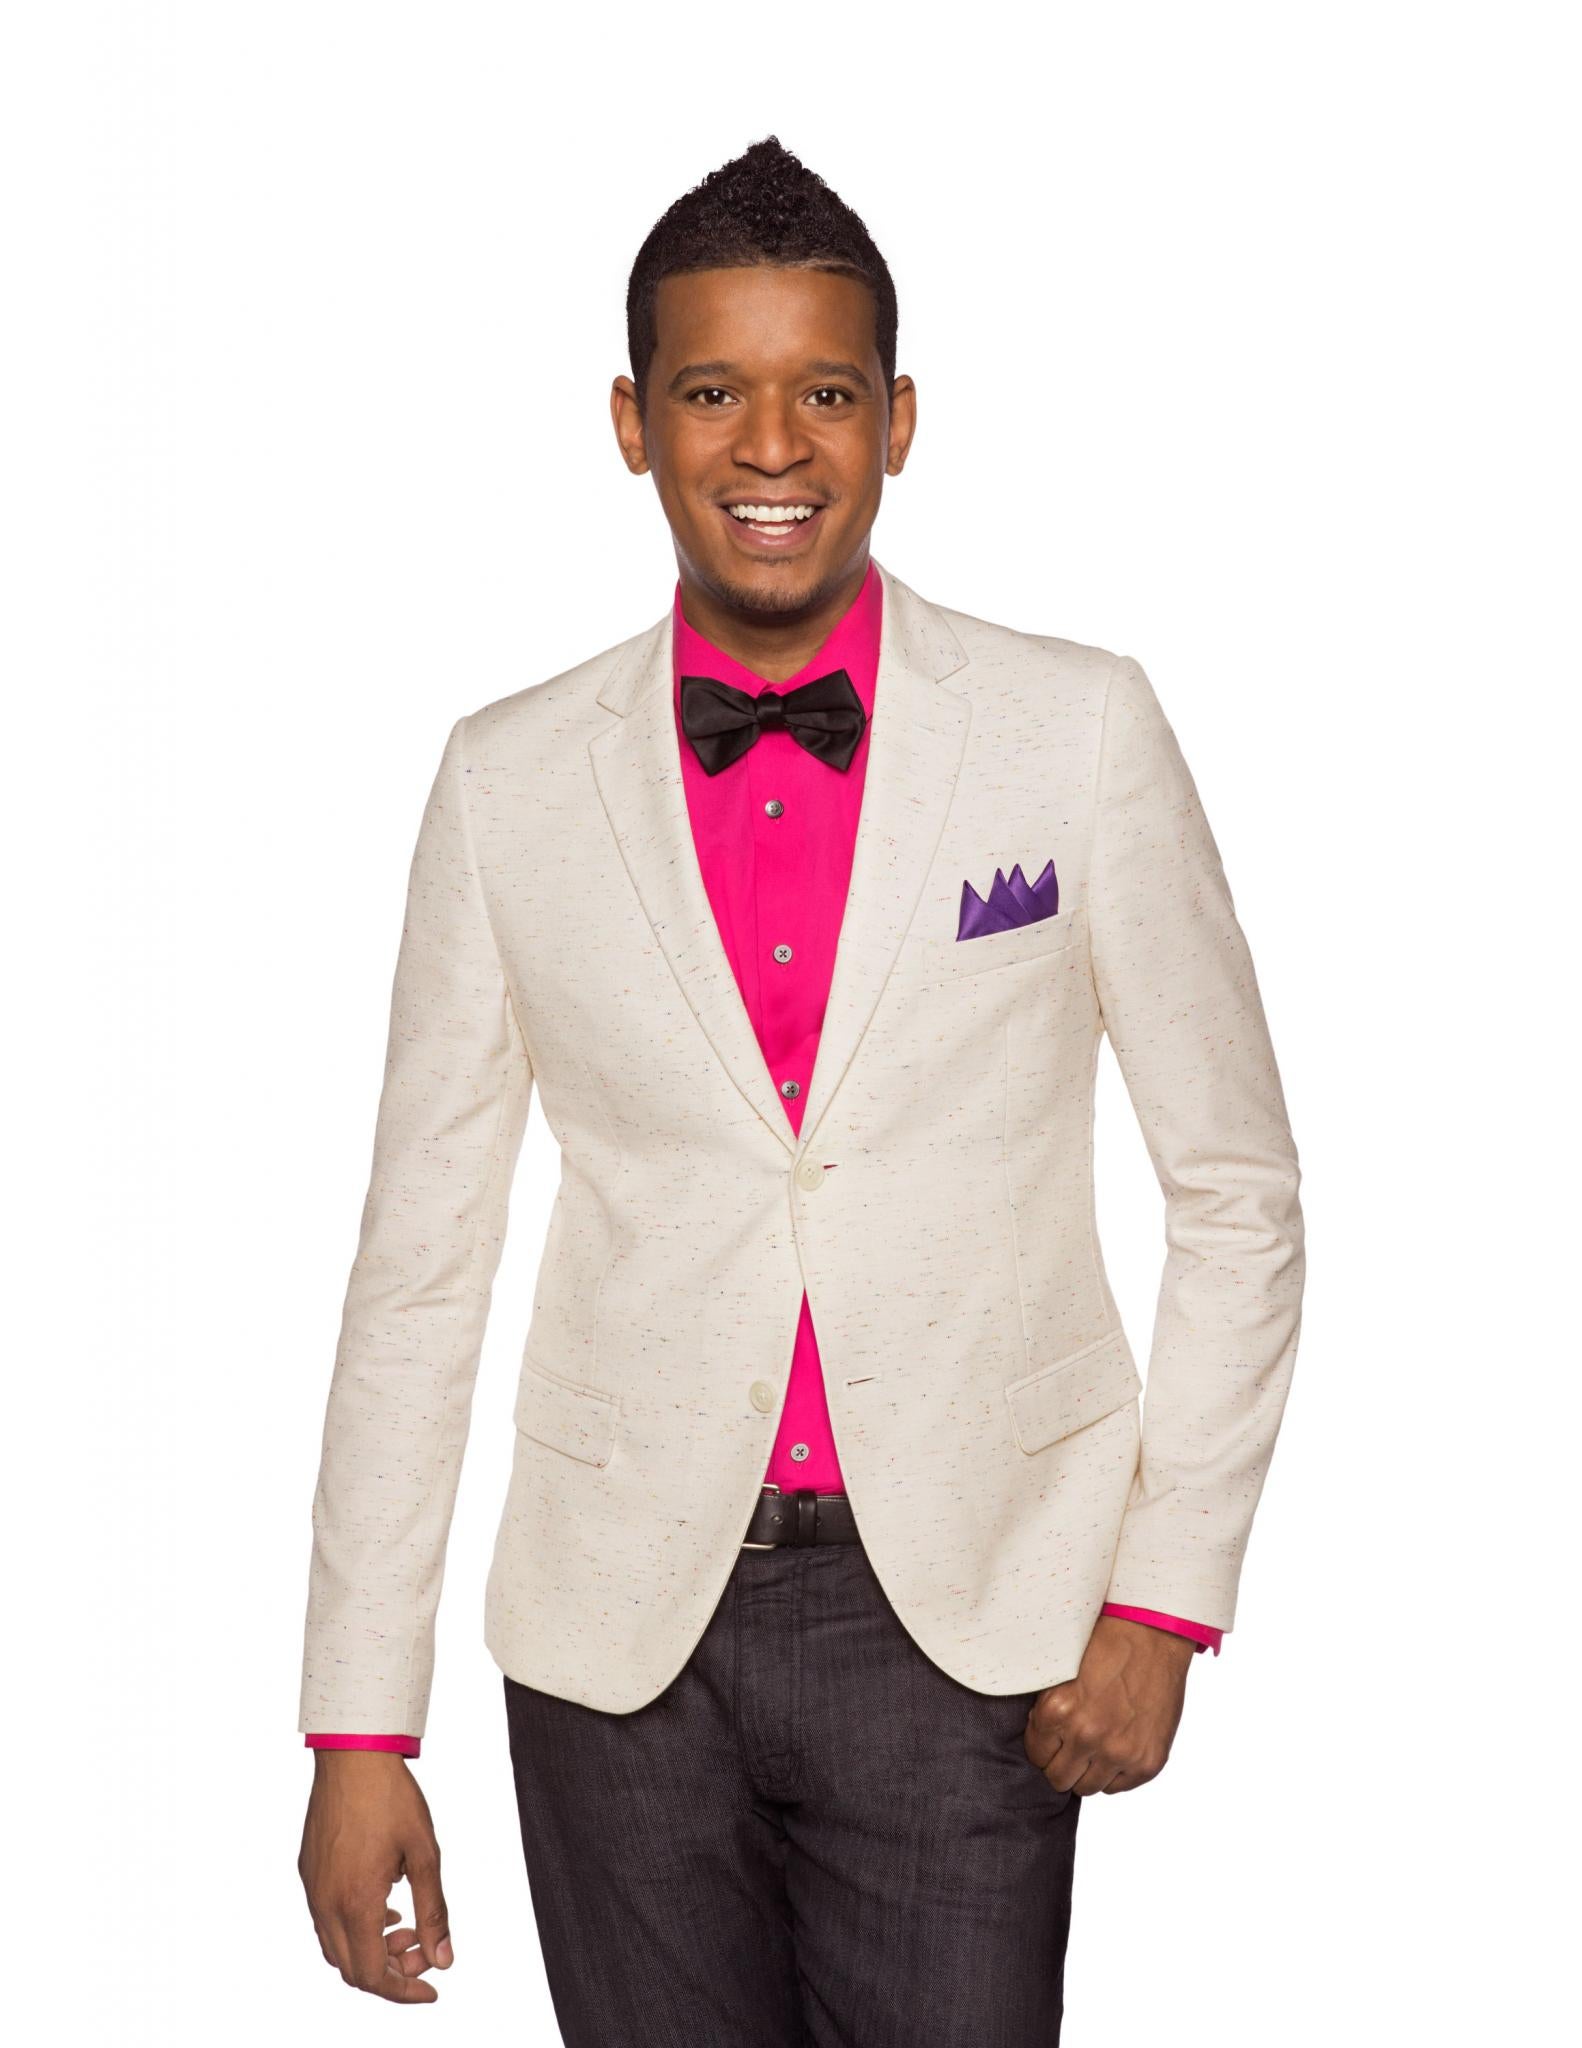 7 Things You Didn't Know About Chef Roble